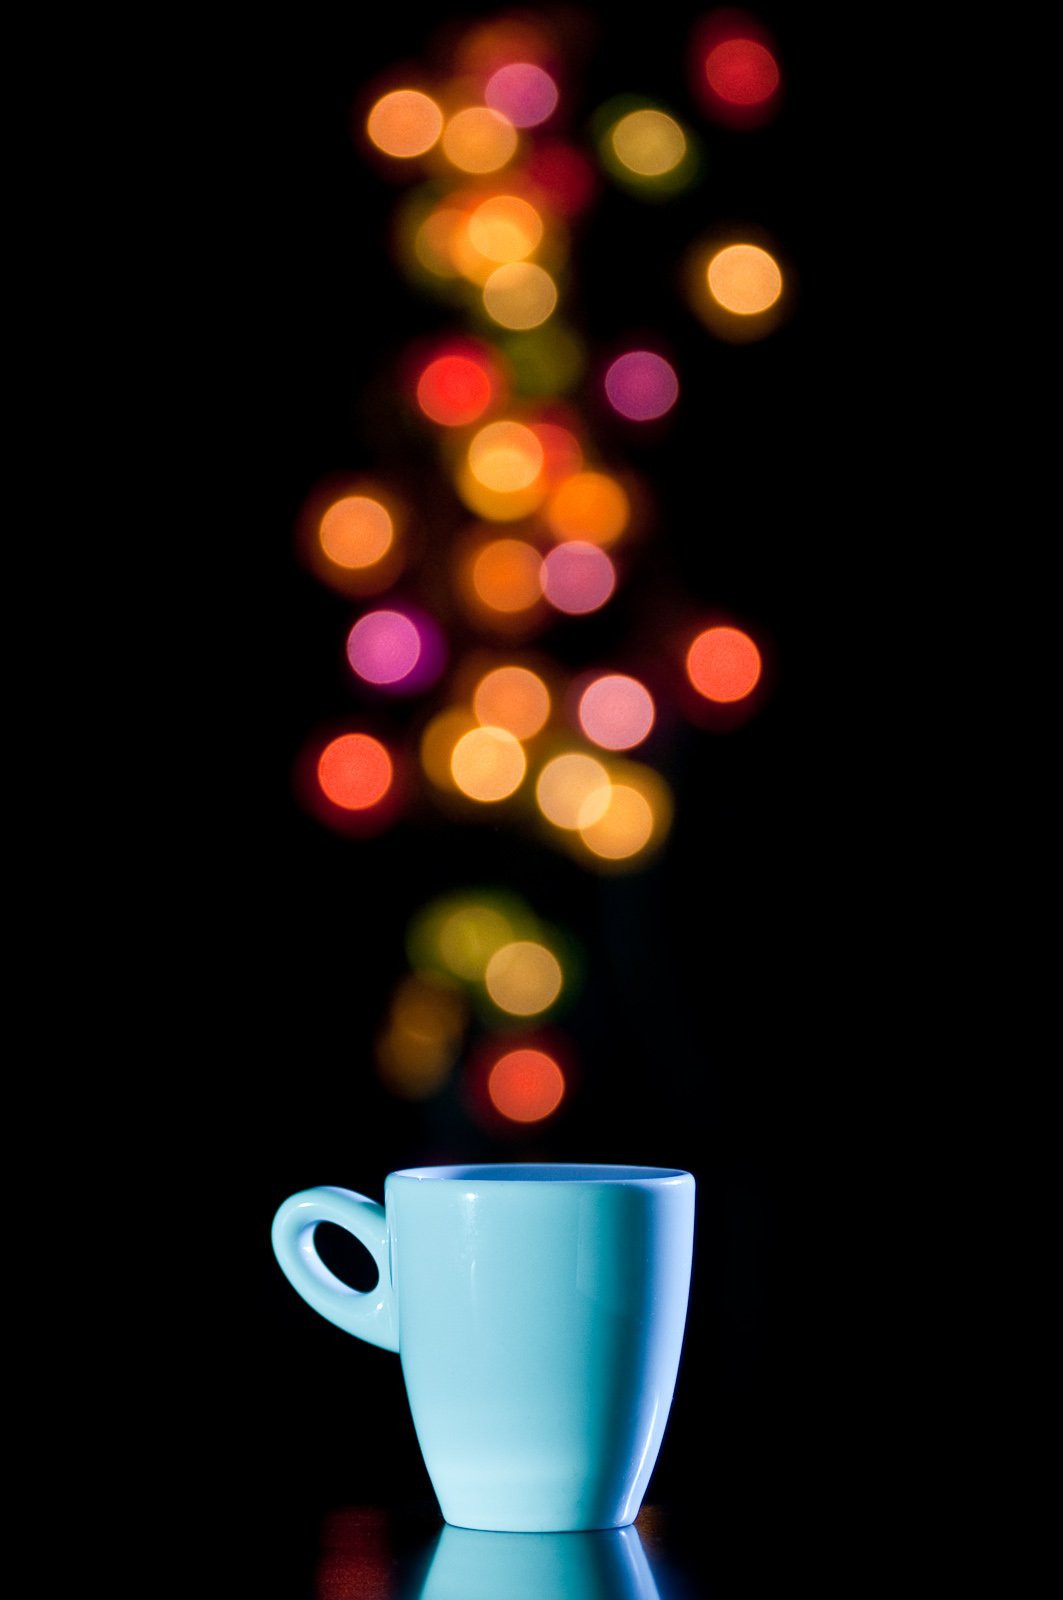 One more cup of bokeh